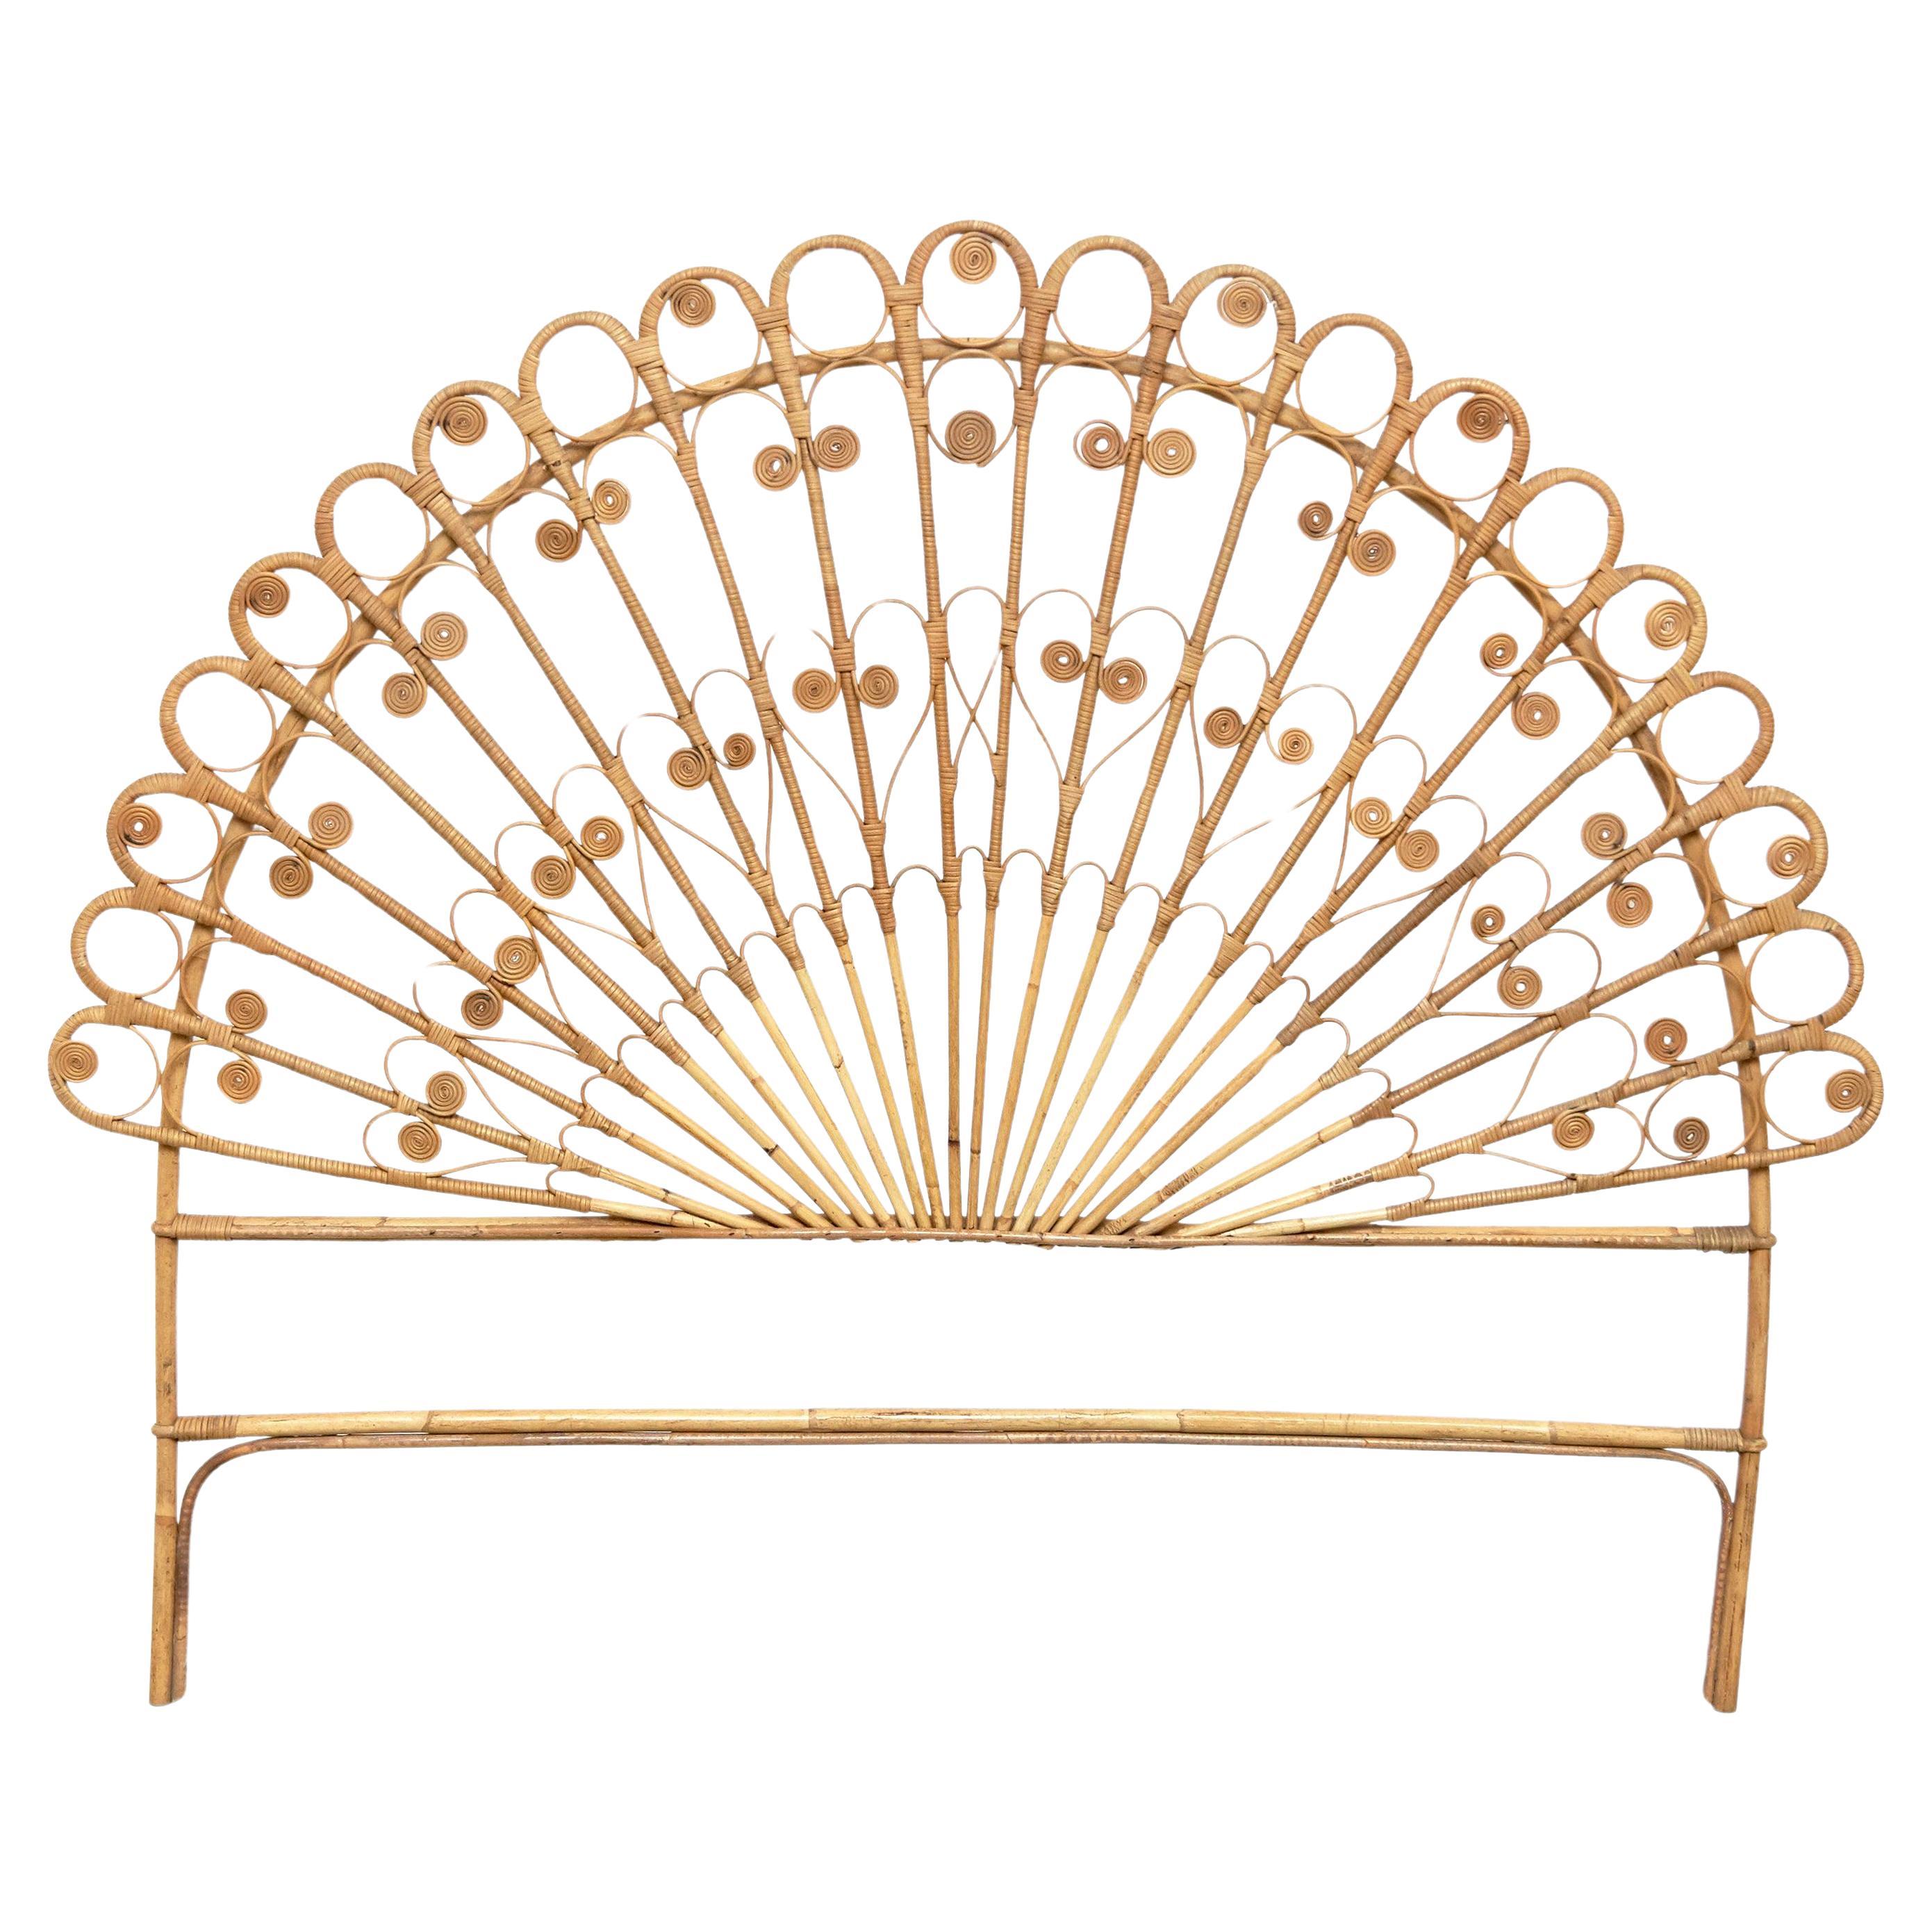 Mid-Century Modern Bamboo and Rattan Headboard Handcrafted French Riviera, 1960